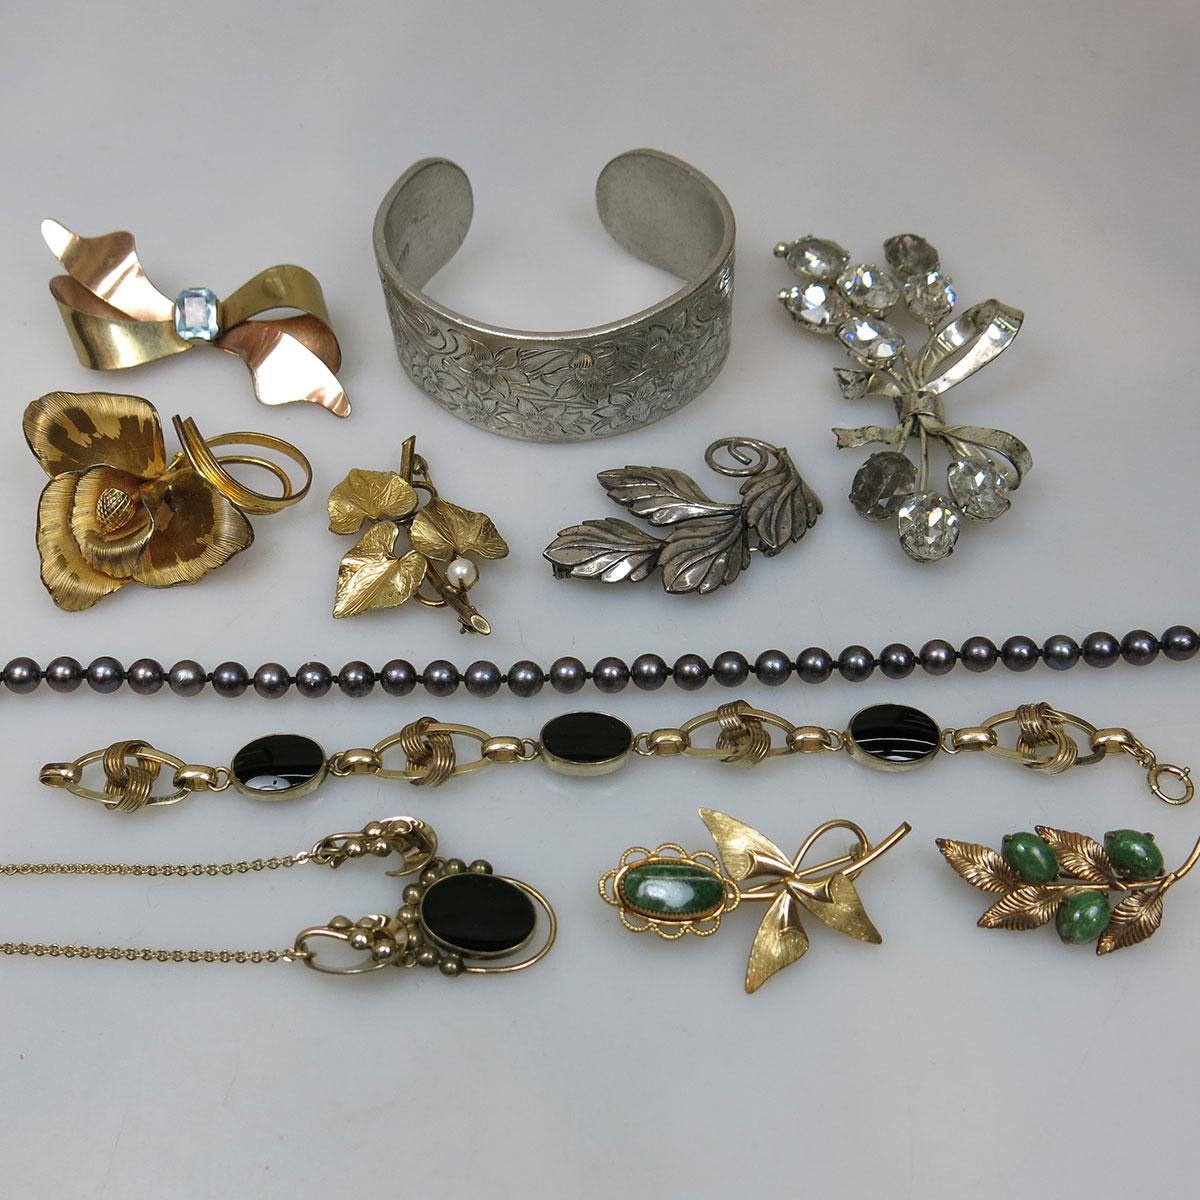 Quantity Of Silver, Pewter And Gold-Filled Jewellery